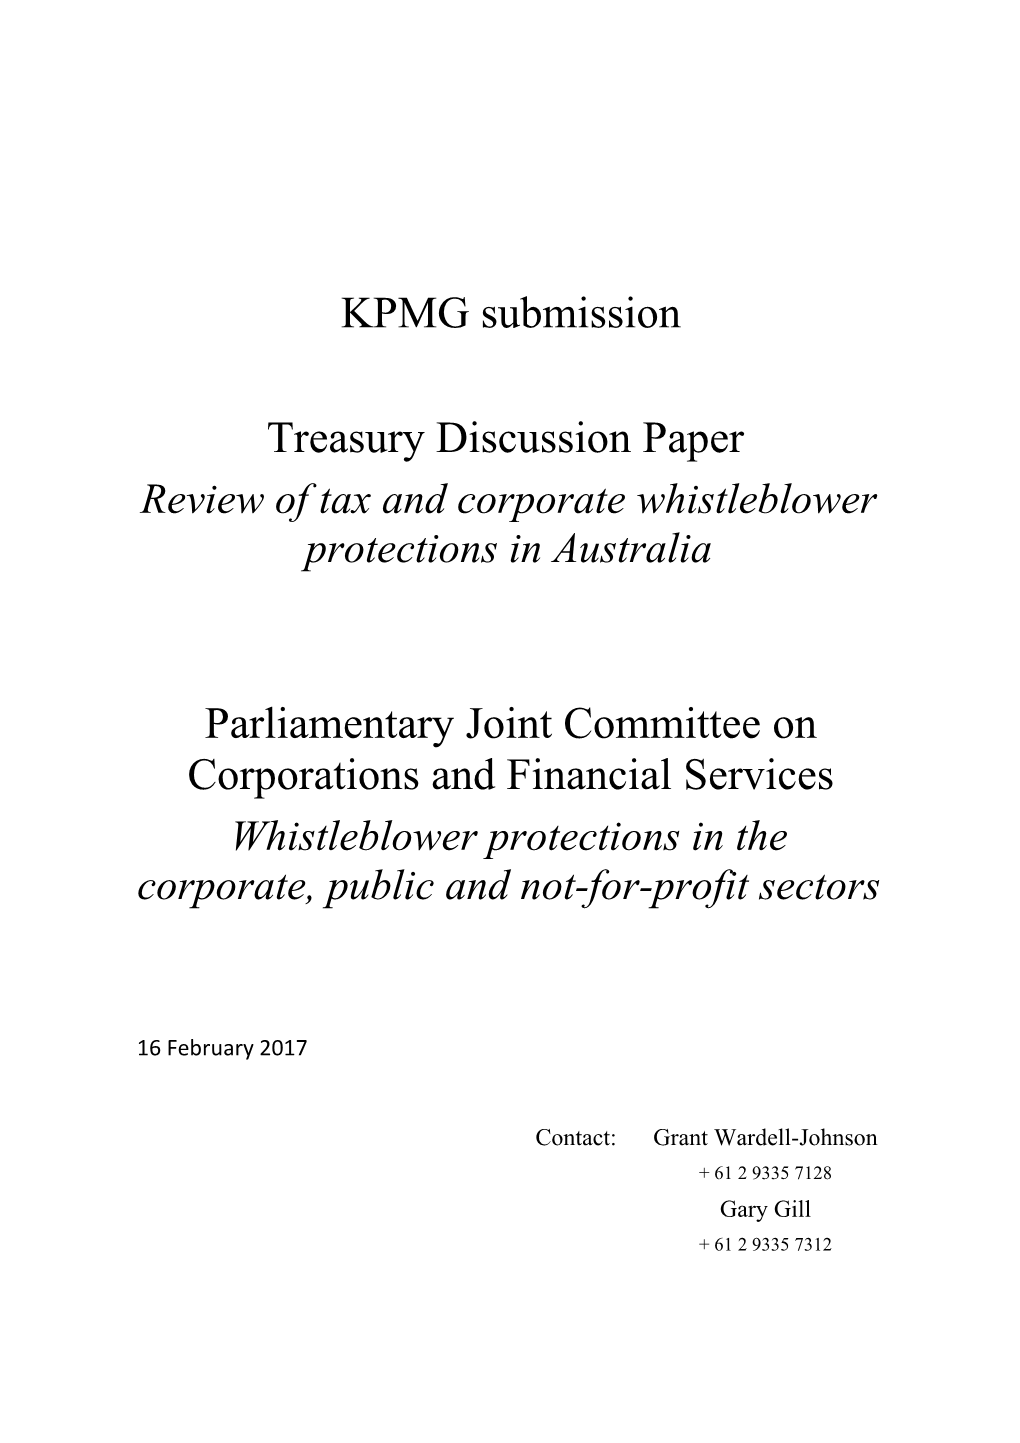 KPMG - Submission in Response To: Review of Tax and Corporate Whistleblower Protections